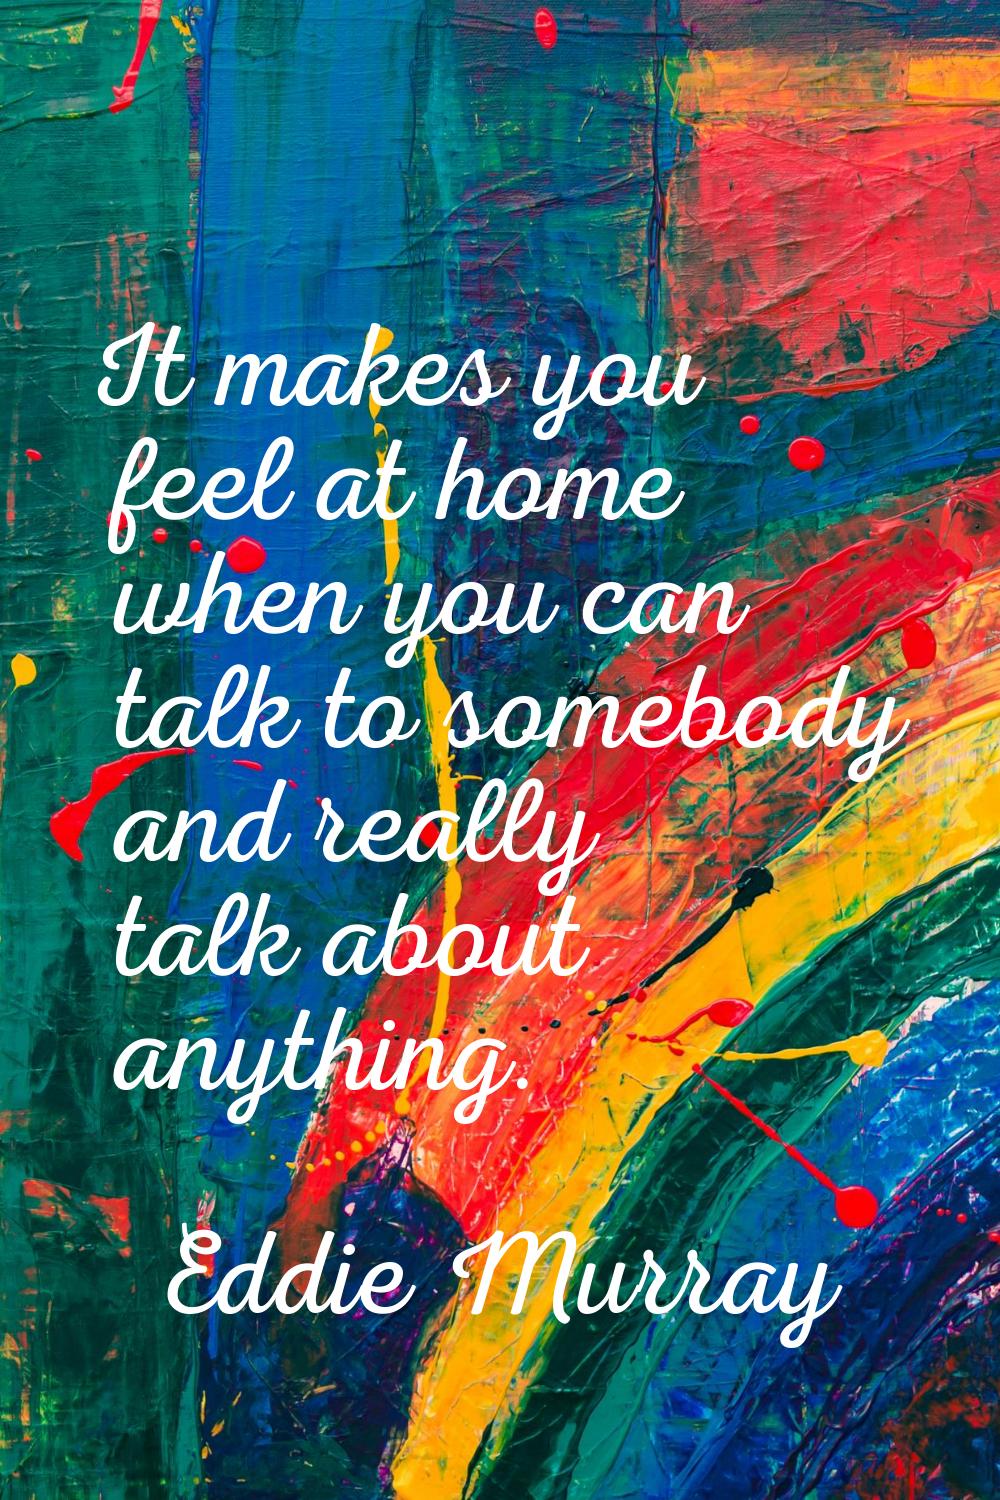 It makes you feel at home when you can talk to somebody and really talk about anything.